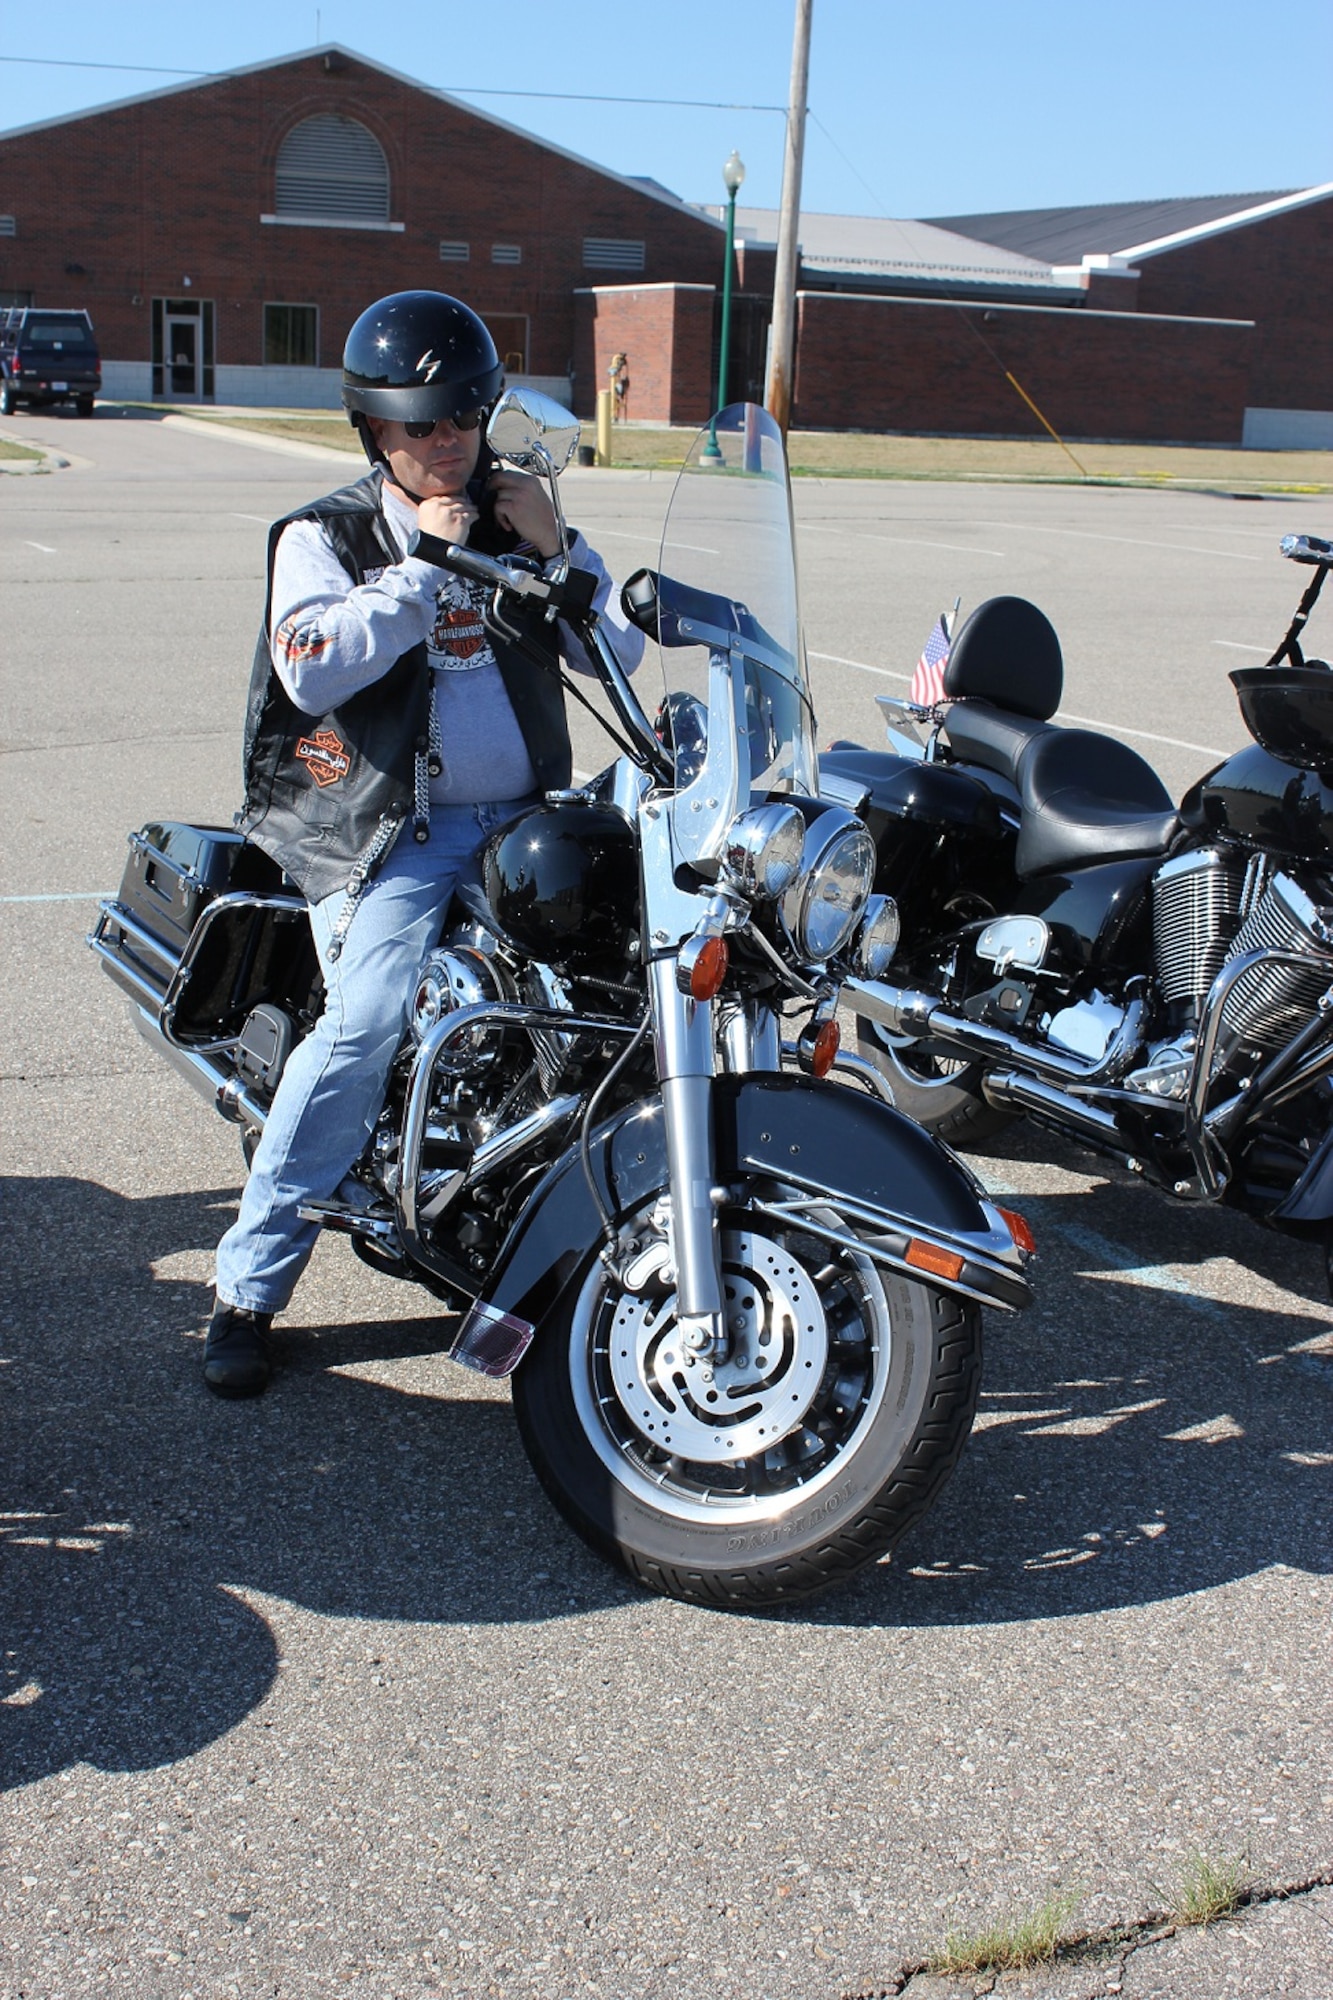 SSgt. Steven Bilof, security policeman with the 127th Security Forces Squadron, prepares to participate in the first Motorcycle Mentorship Poker Run on July 30 from Selfridge Air National Guard Base.  Personal protective equipment required to ride on Selfridge includes sturdy shoes, long pants, long sleeves, gloves, and eye protection, as well as a helmet.  The motorcycle rally focused on rider mentorship and safety.(USAF photo by Capt. Penny Carroll)